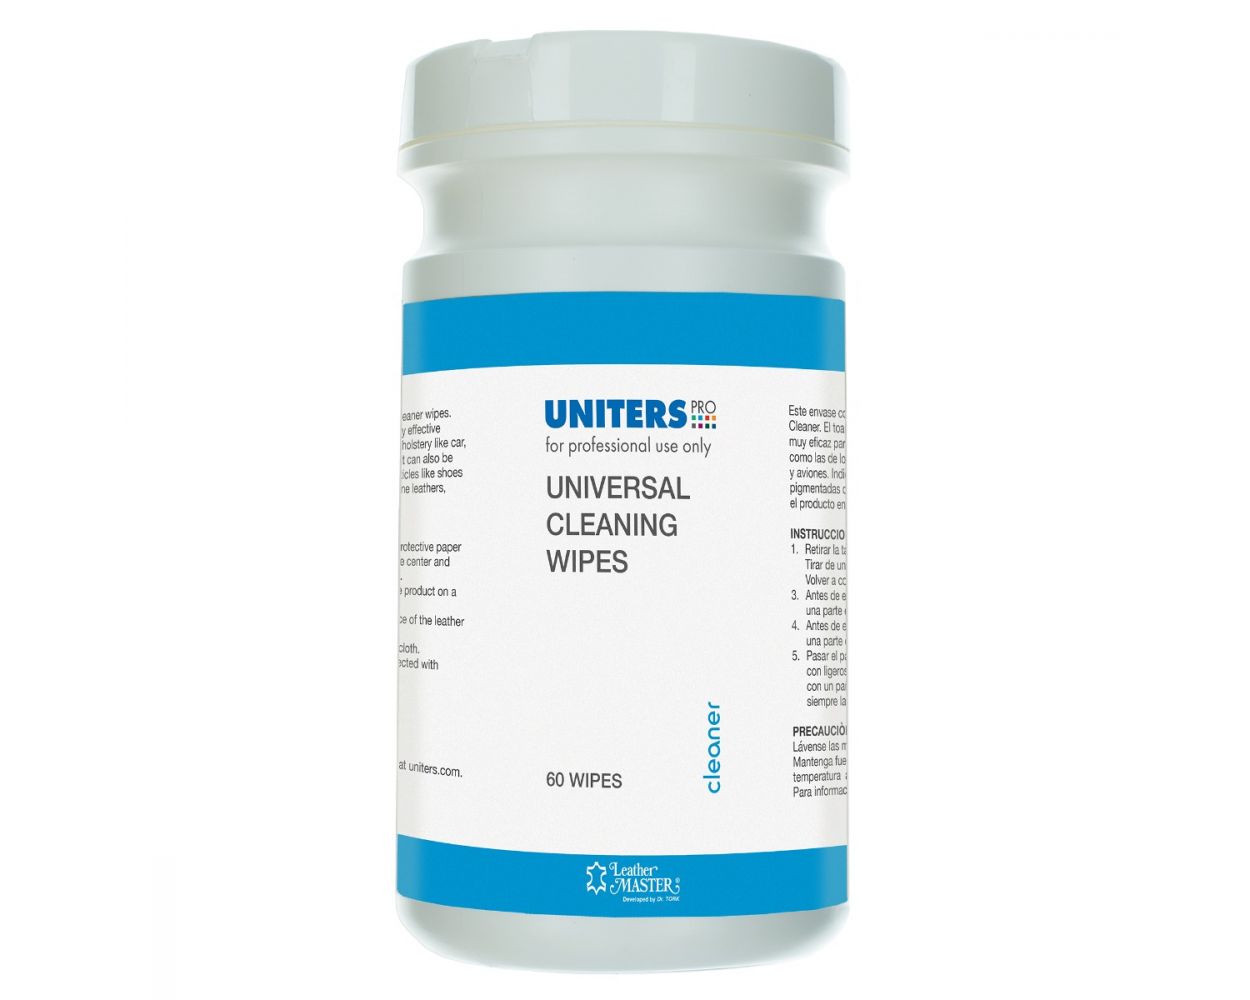 UNITERS PRO UNIVERSAL CLEANER WIPE 60 COUNT TUB